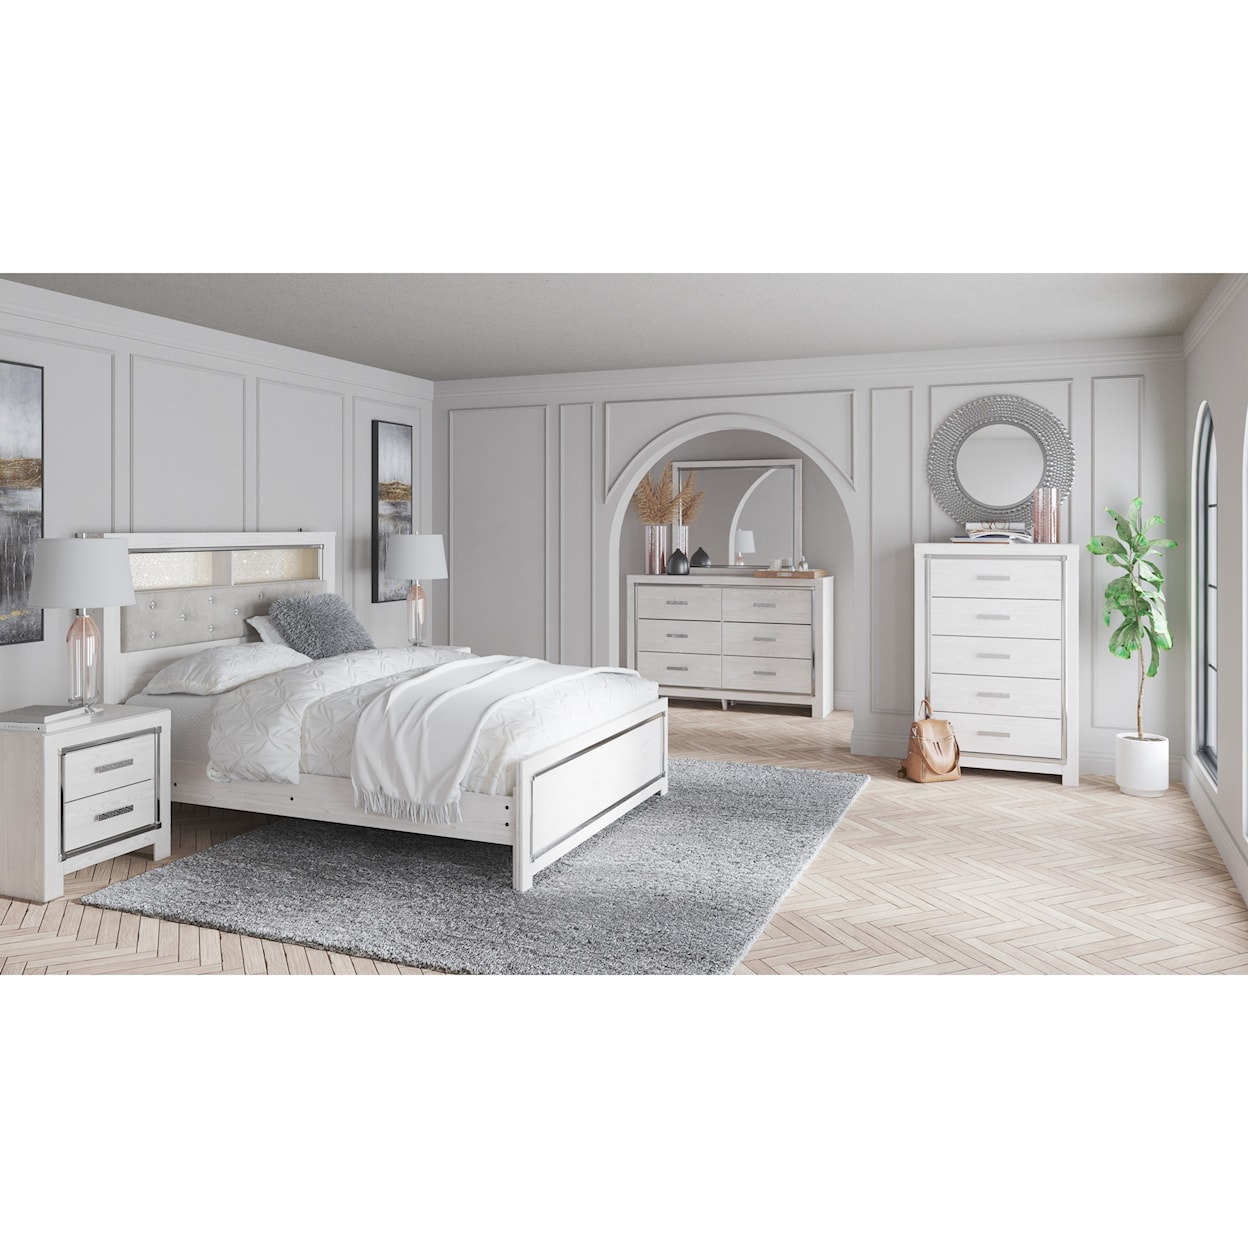 Ashley Furniture Signature Design Altyra Queen Bedroom Group